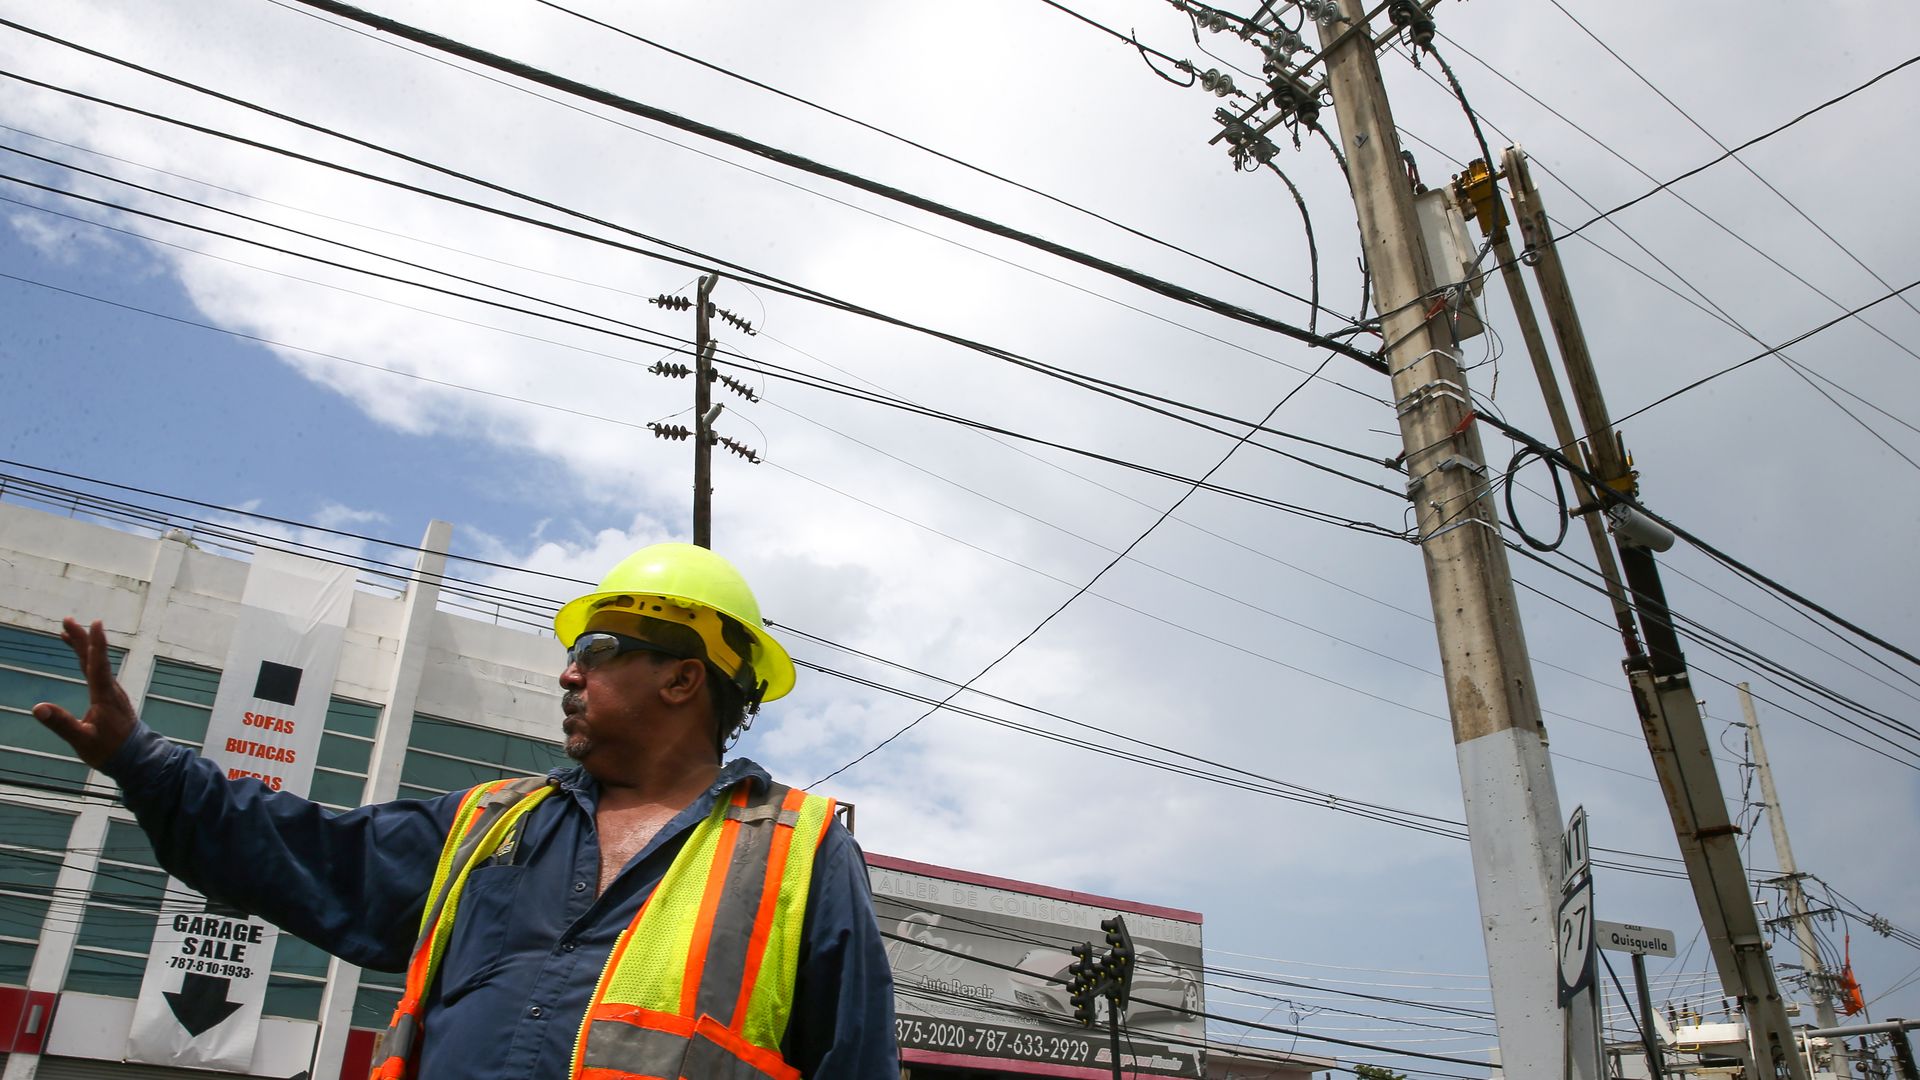 Puerto Rico's workers working on power lines